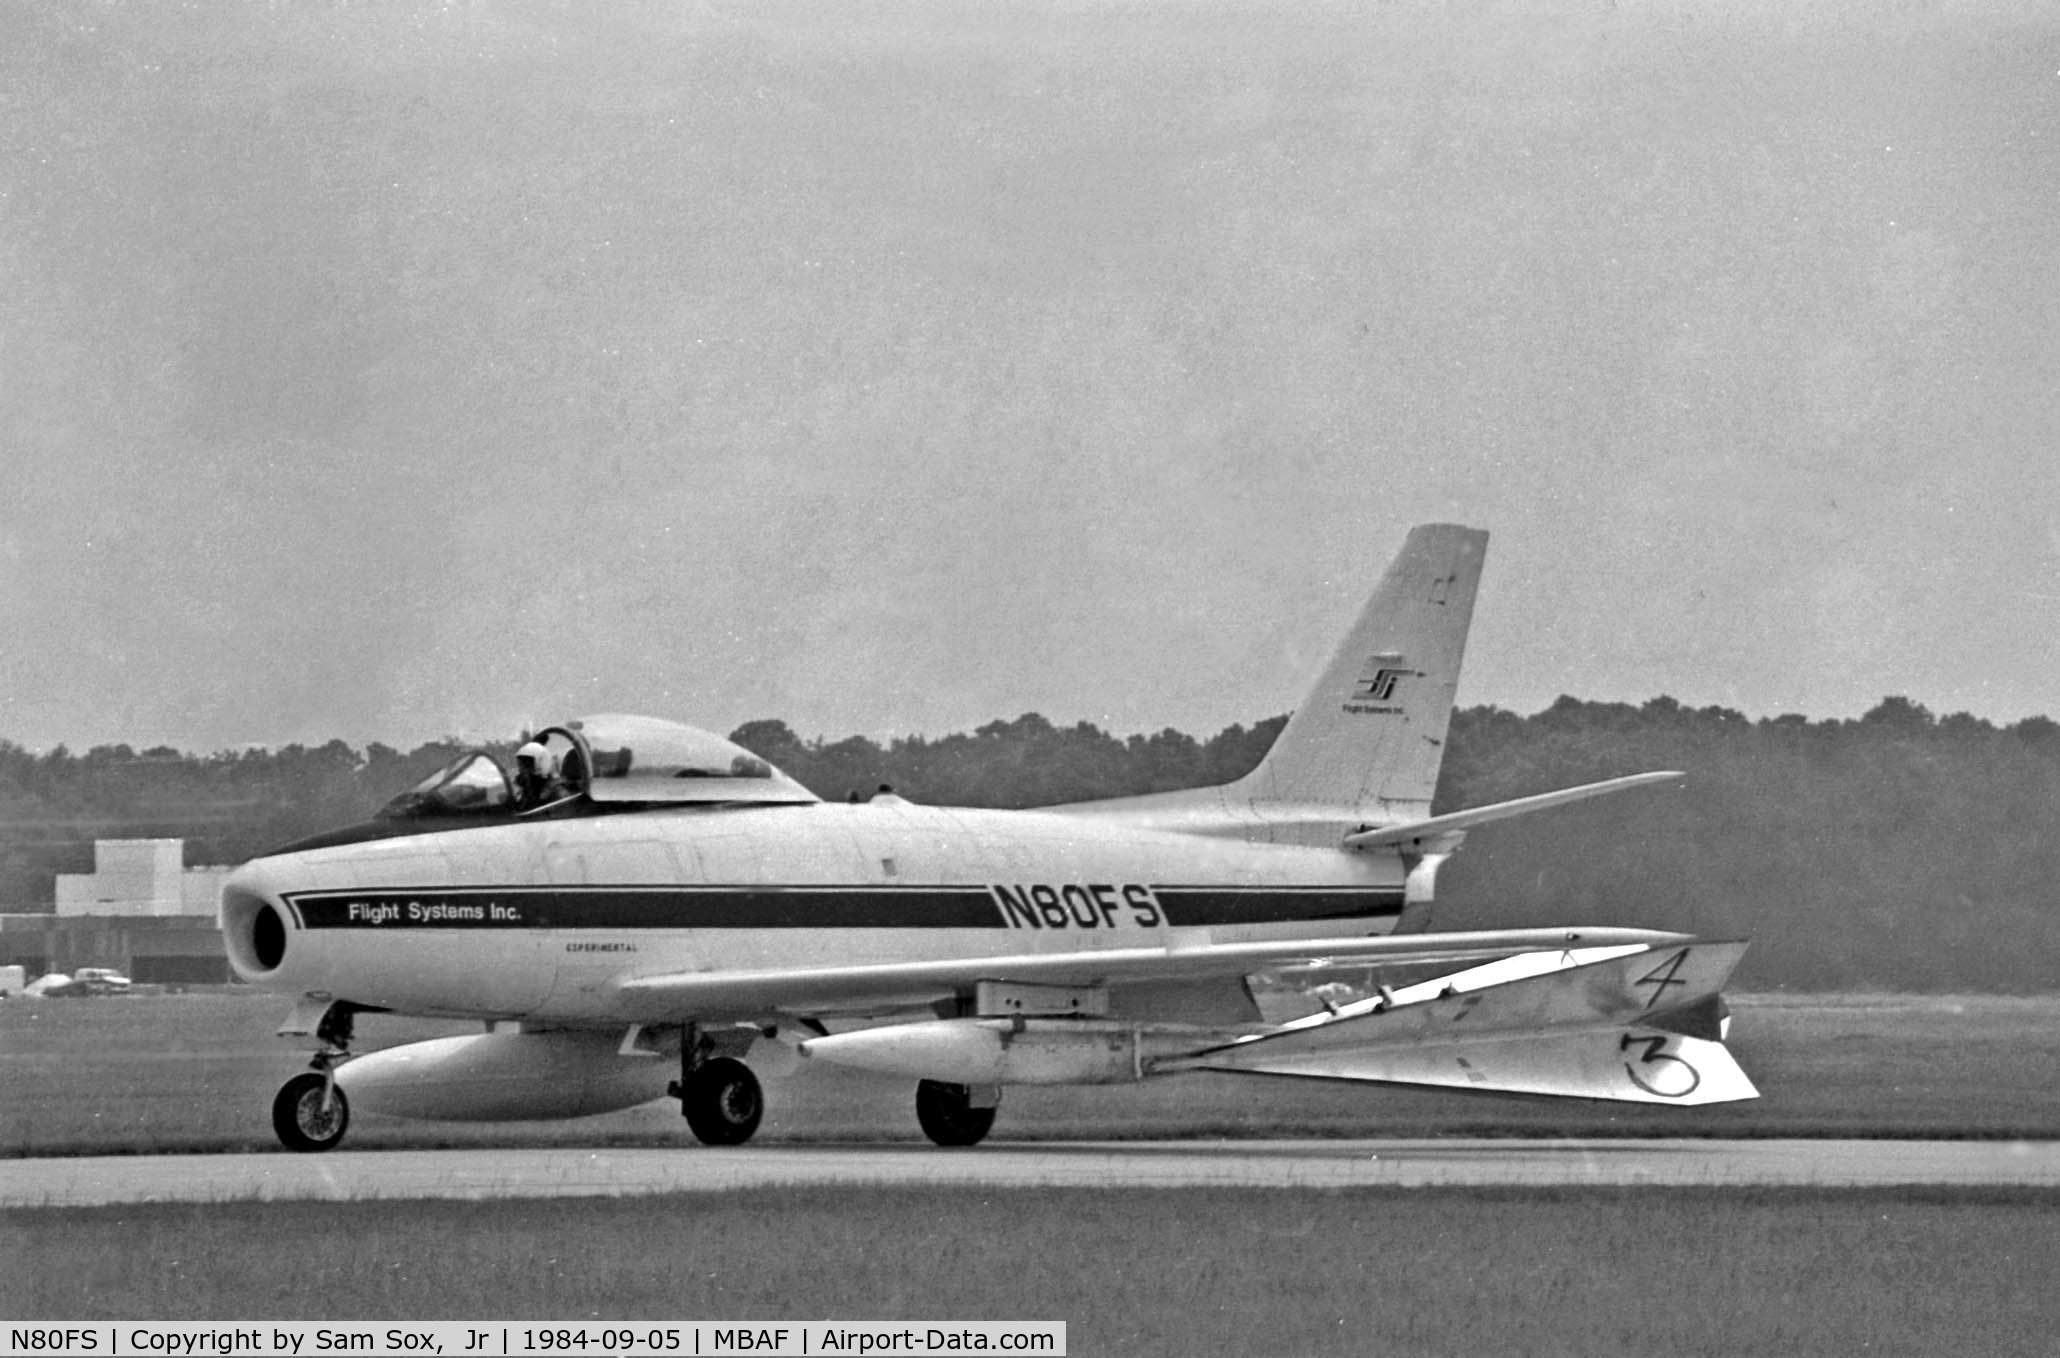 N80FS, 1958 Canadair CL-13B Sabre 6 C/N S6-1675, While visiting MBAFB Summer 1984, photographed N80FS who was there providing aerial targets for A-10s of the 354th FG.